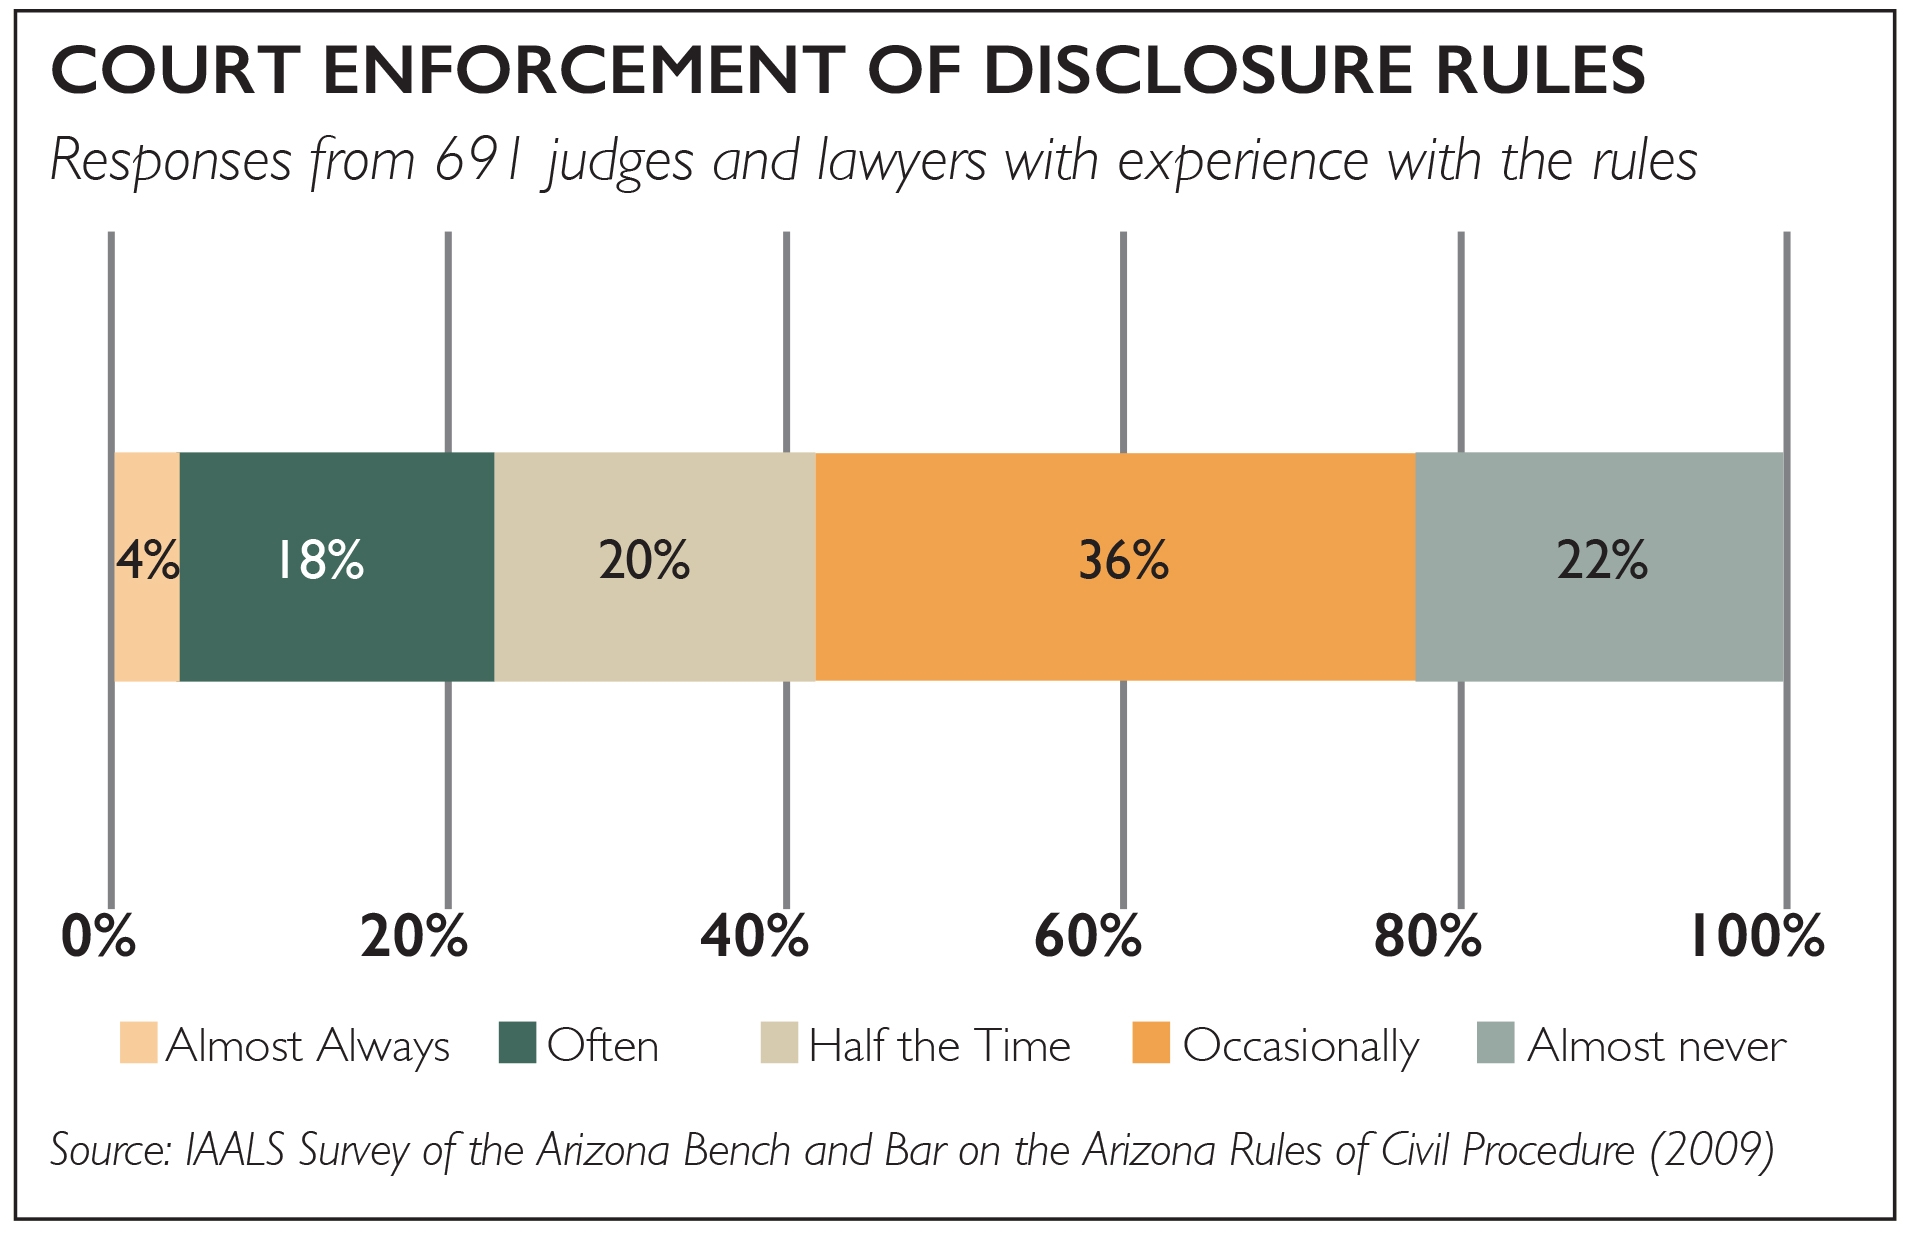 Court Enforcement of Disclosure rules chart showing that a majority of lawyers (36%) report only occasional enforcement of disclosure rules. Source: IAALS Survey of the Arizona Bench and Bar on the Arizona Rules of Civil Procedure.